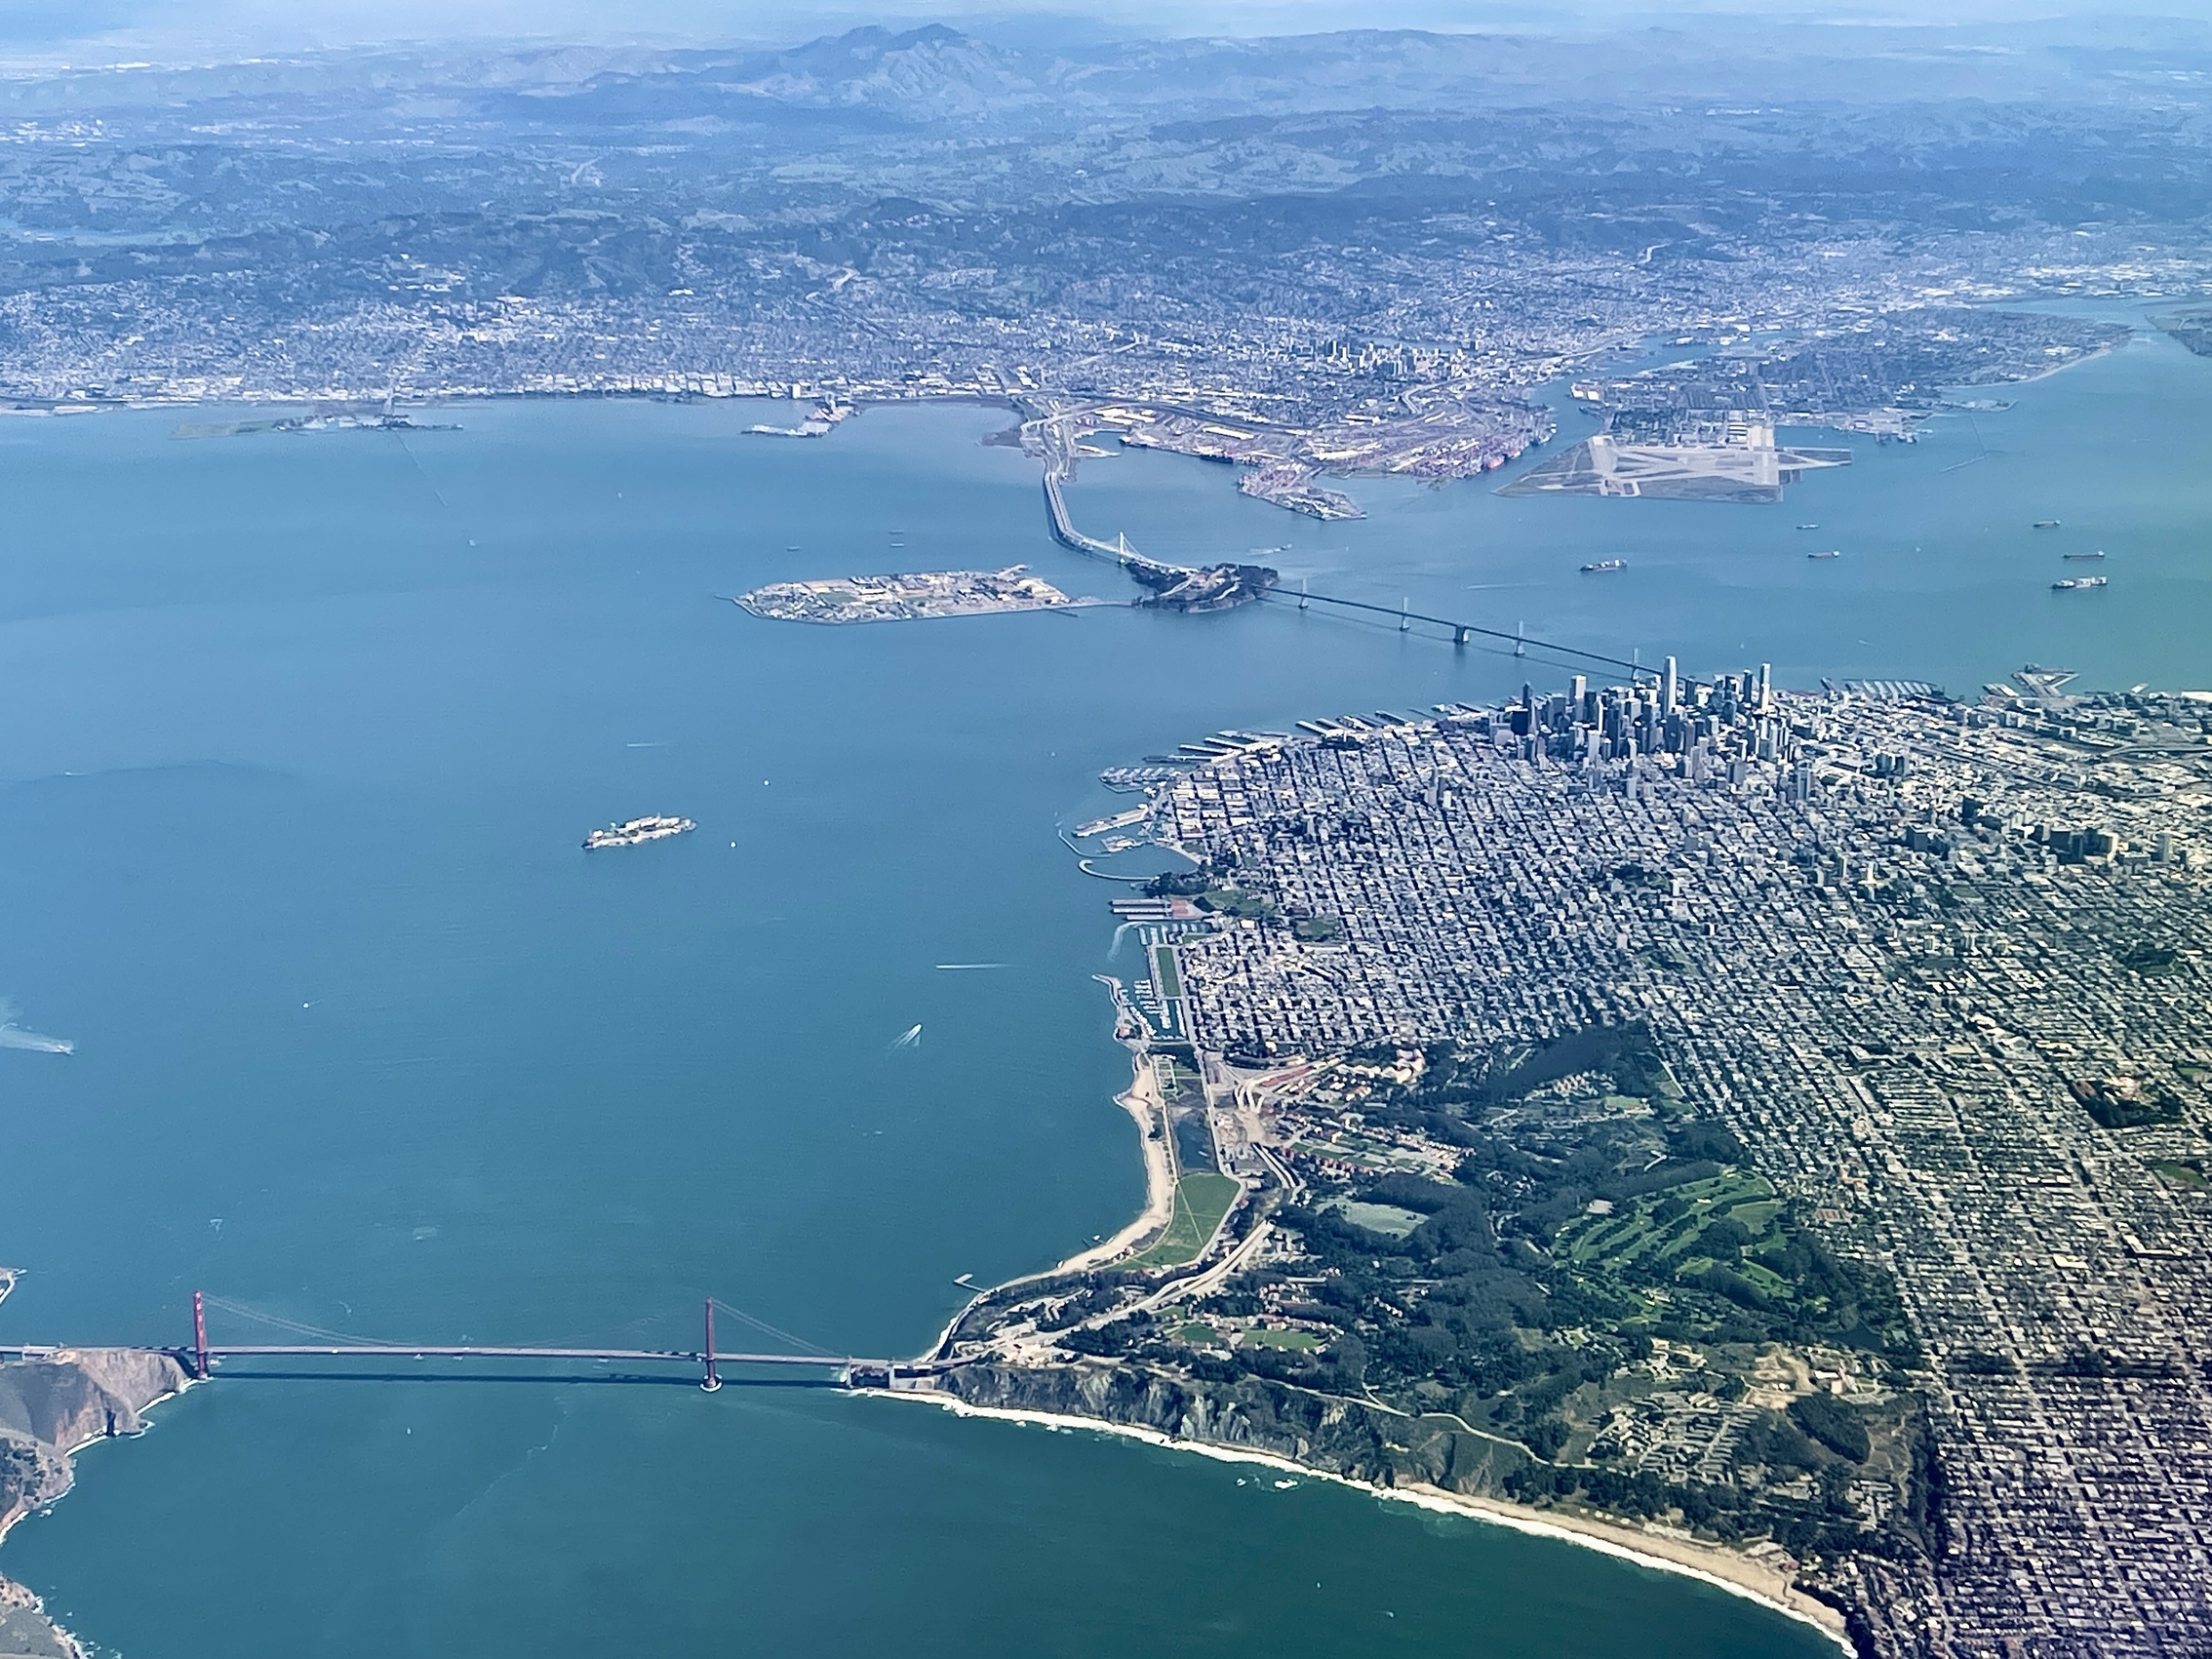 San Francisco from the Sky